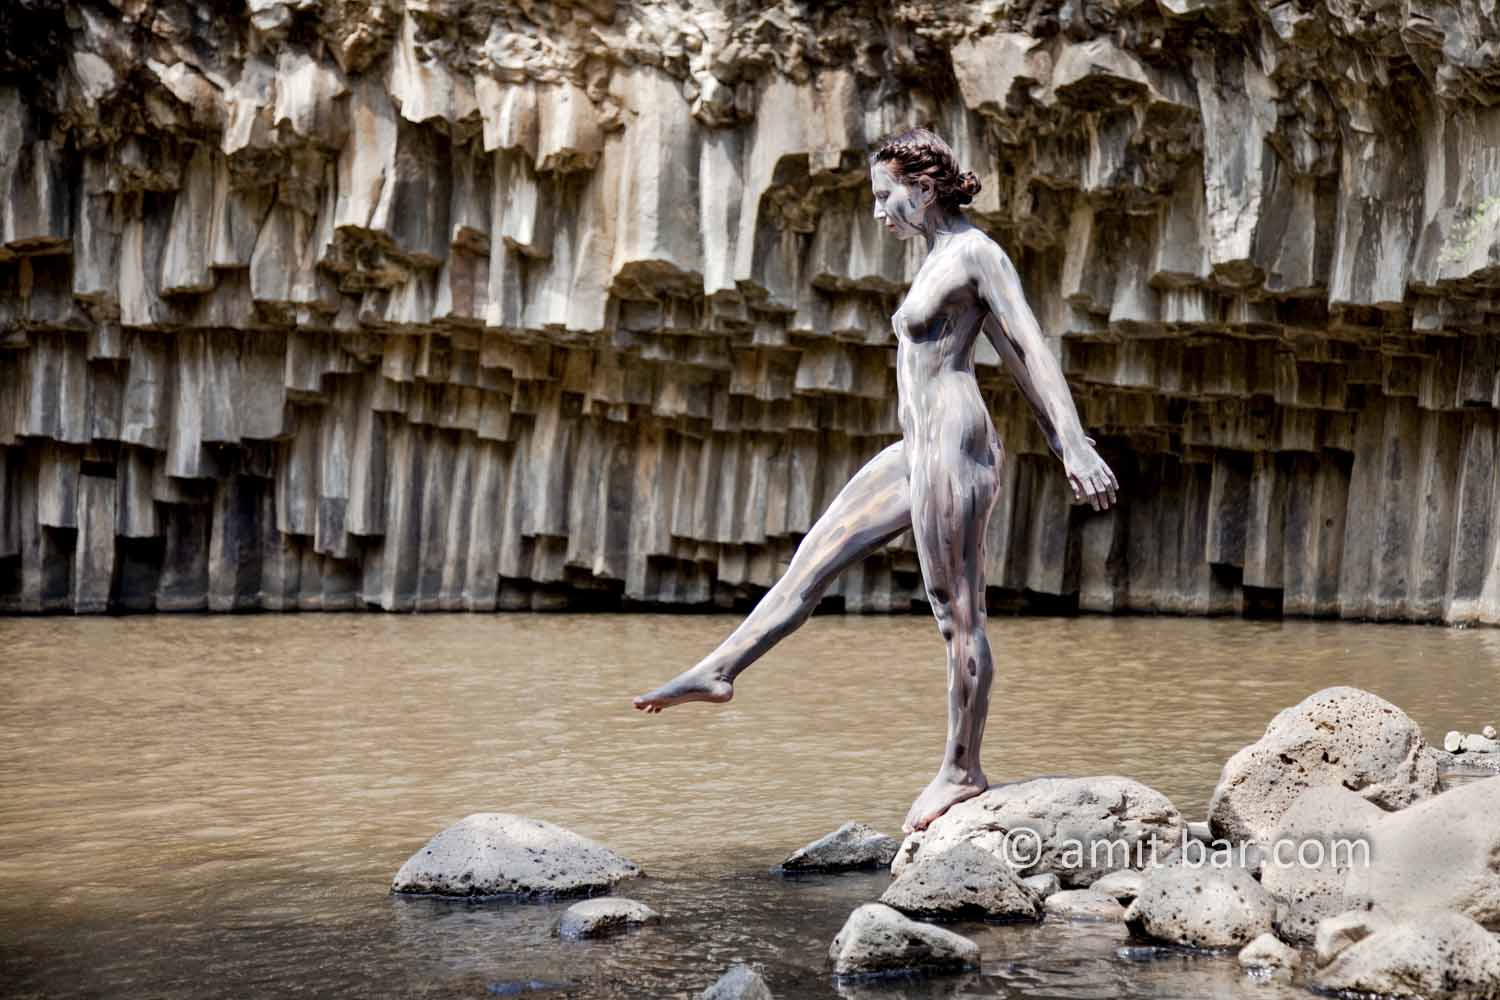 Rocky Girl I: Body painted model at the Golan Heights, Israel